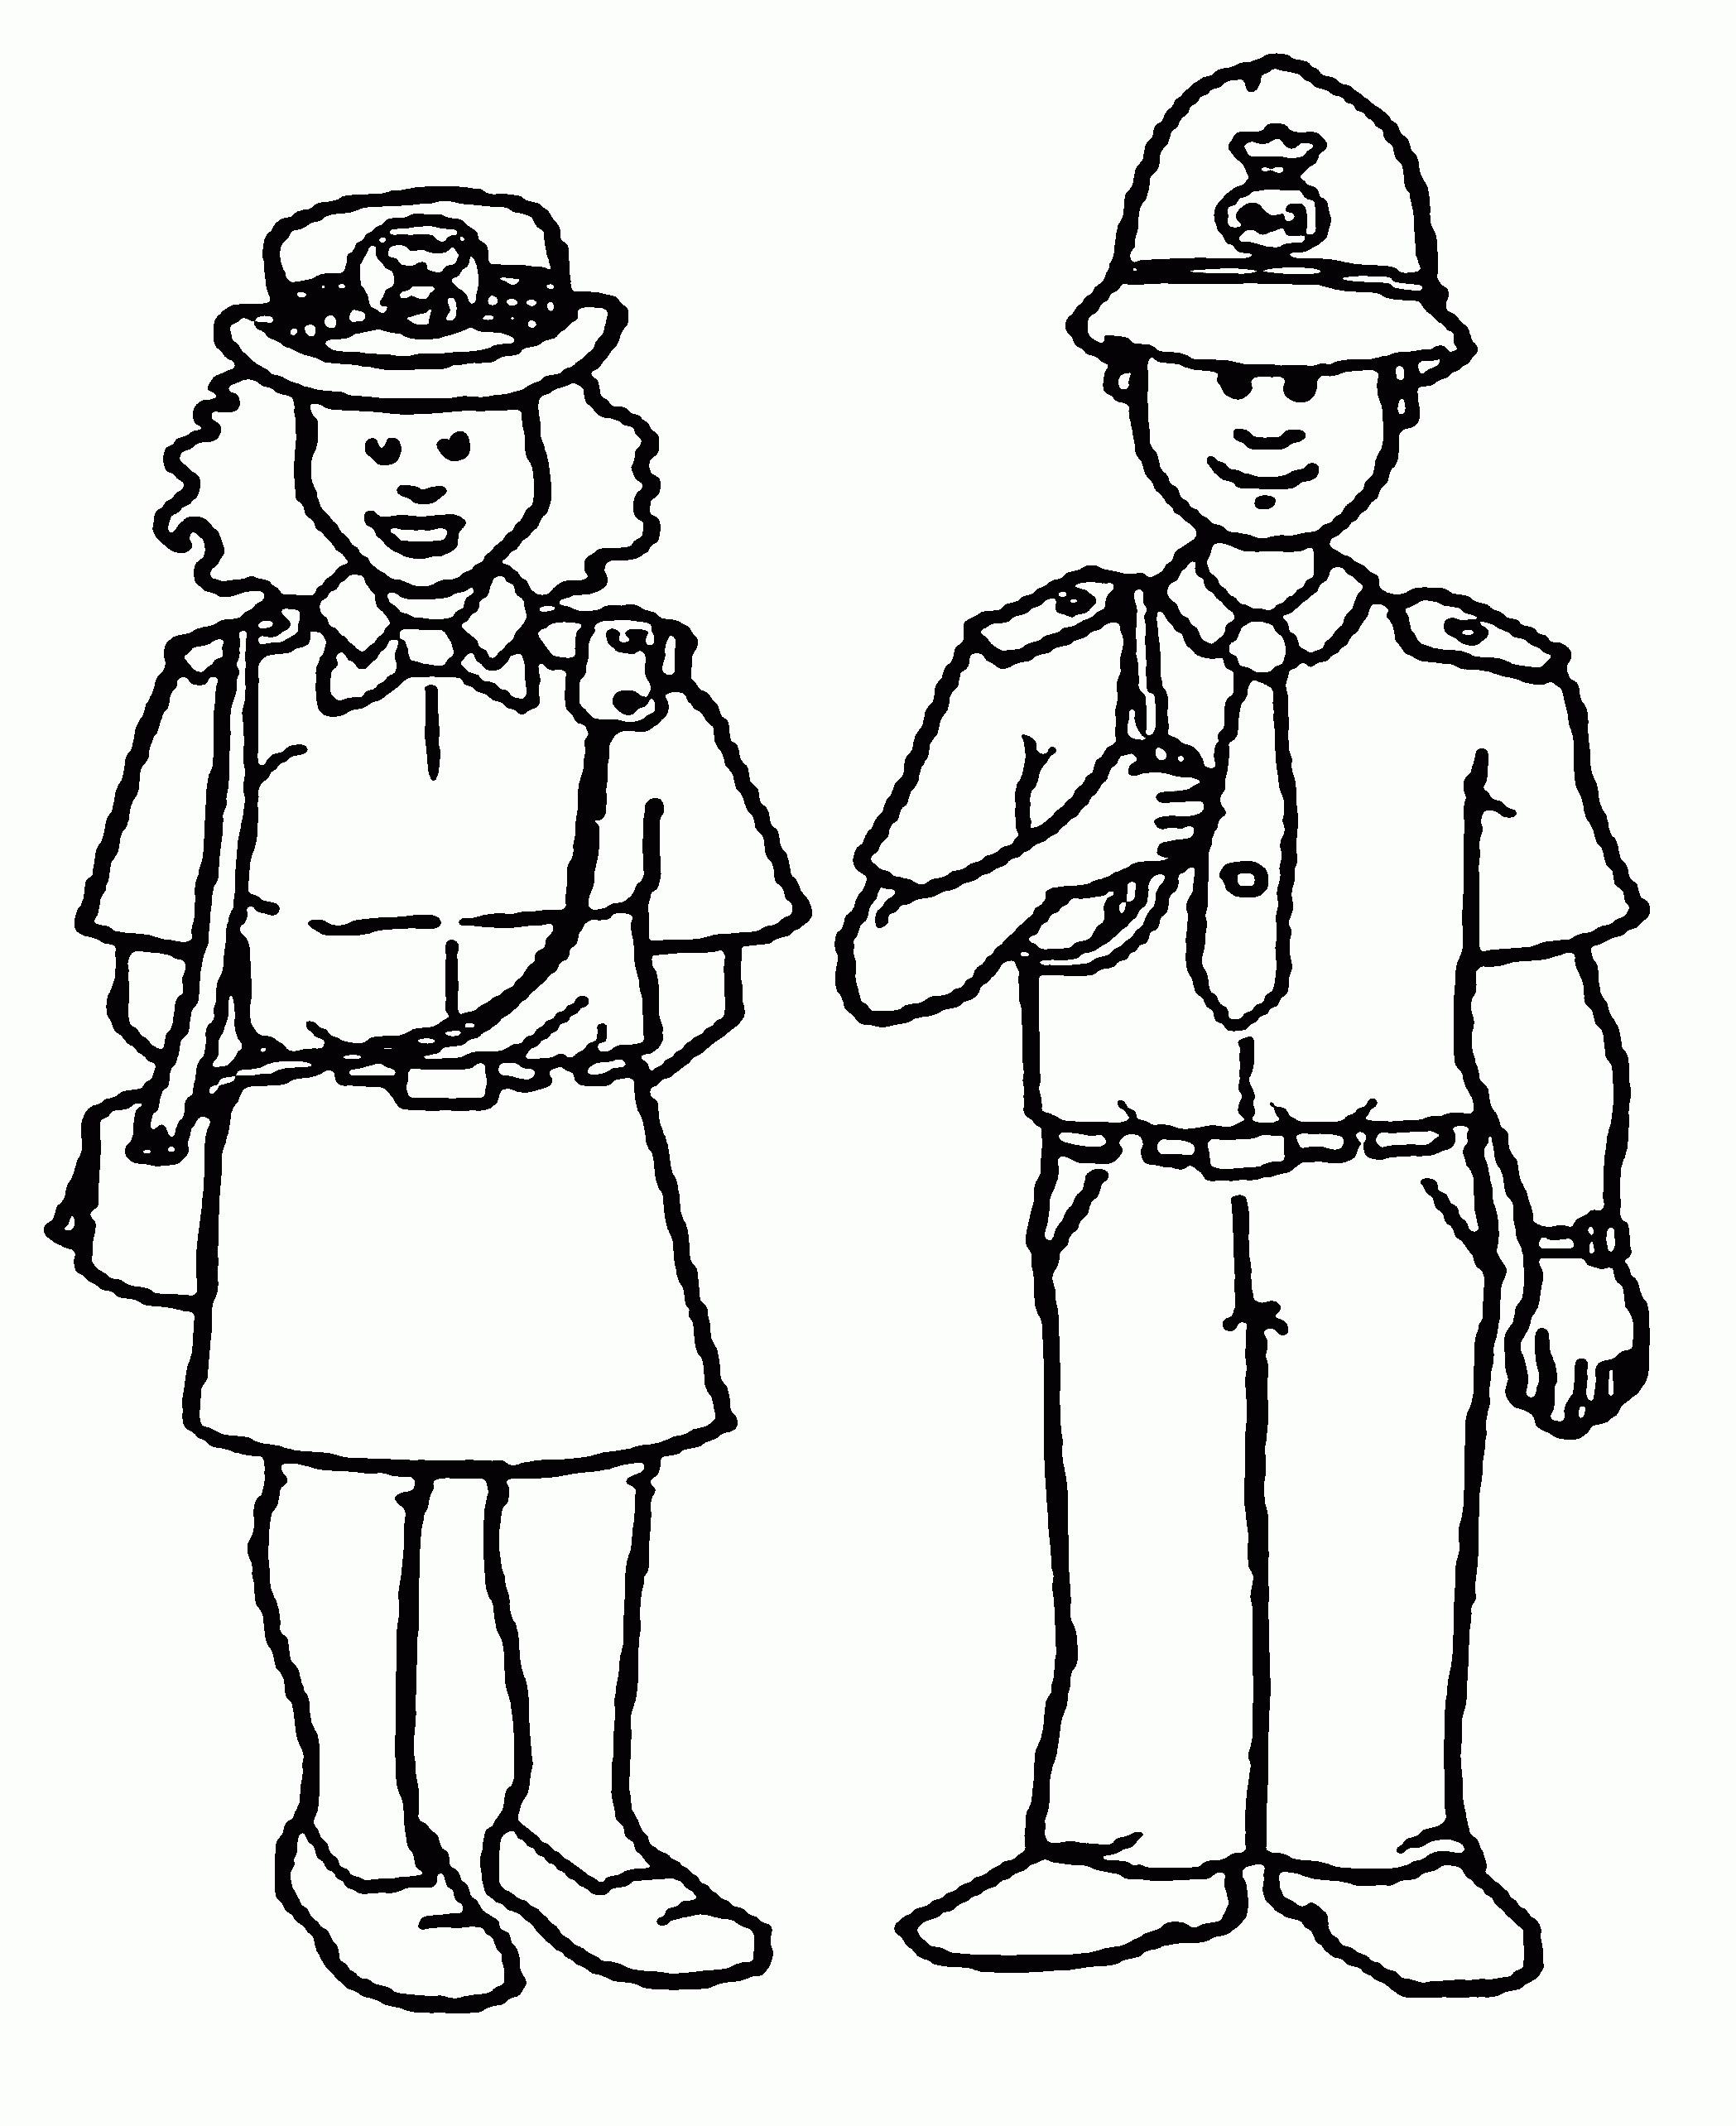 POLICE MAN COLORING PAGE - Coloring Home